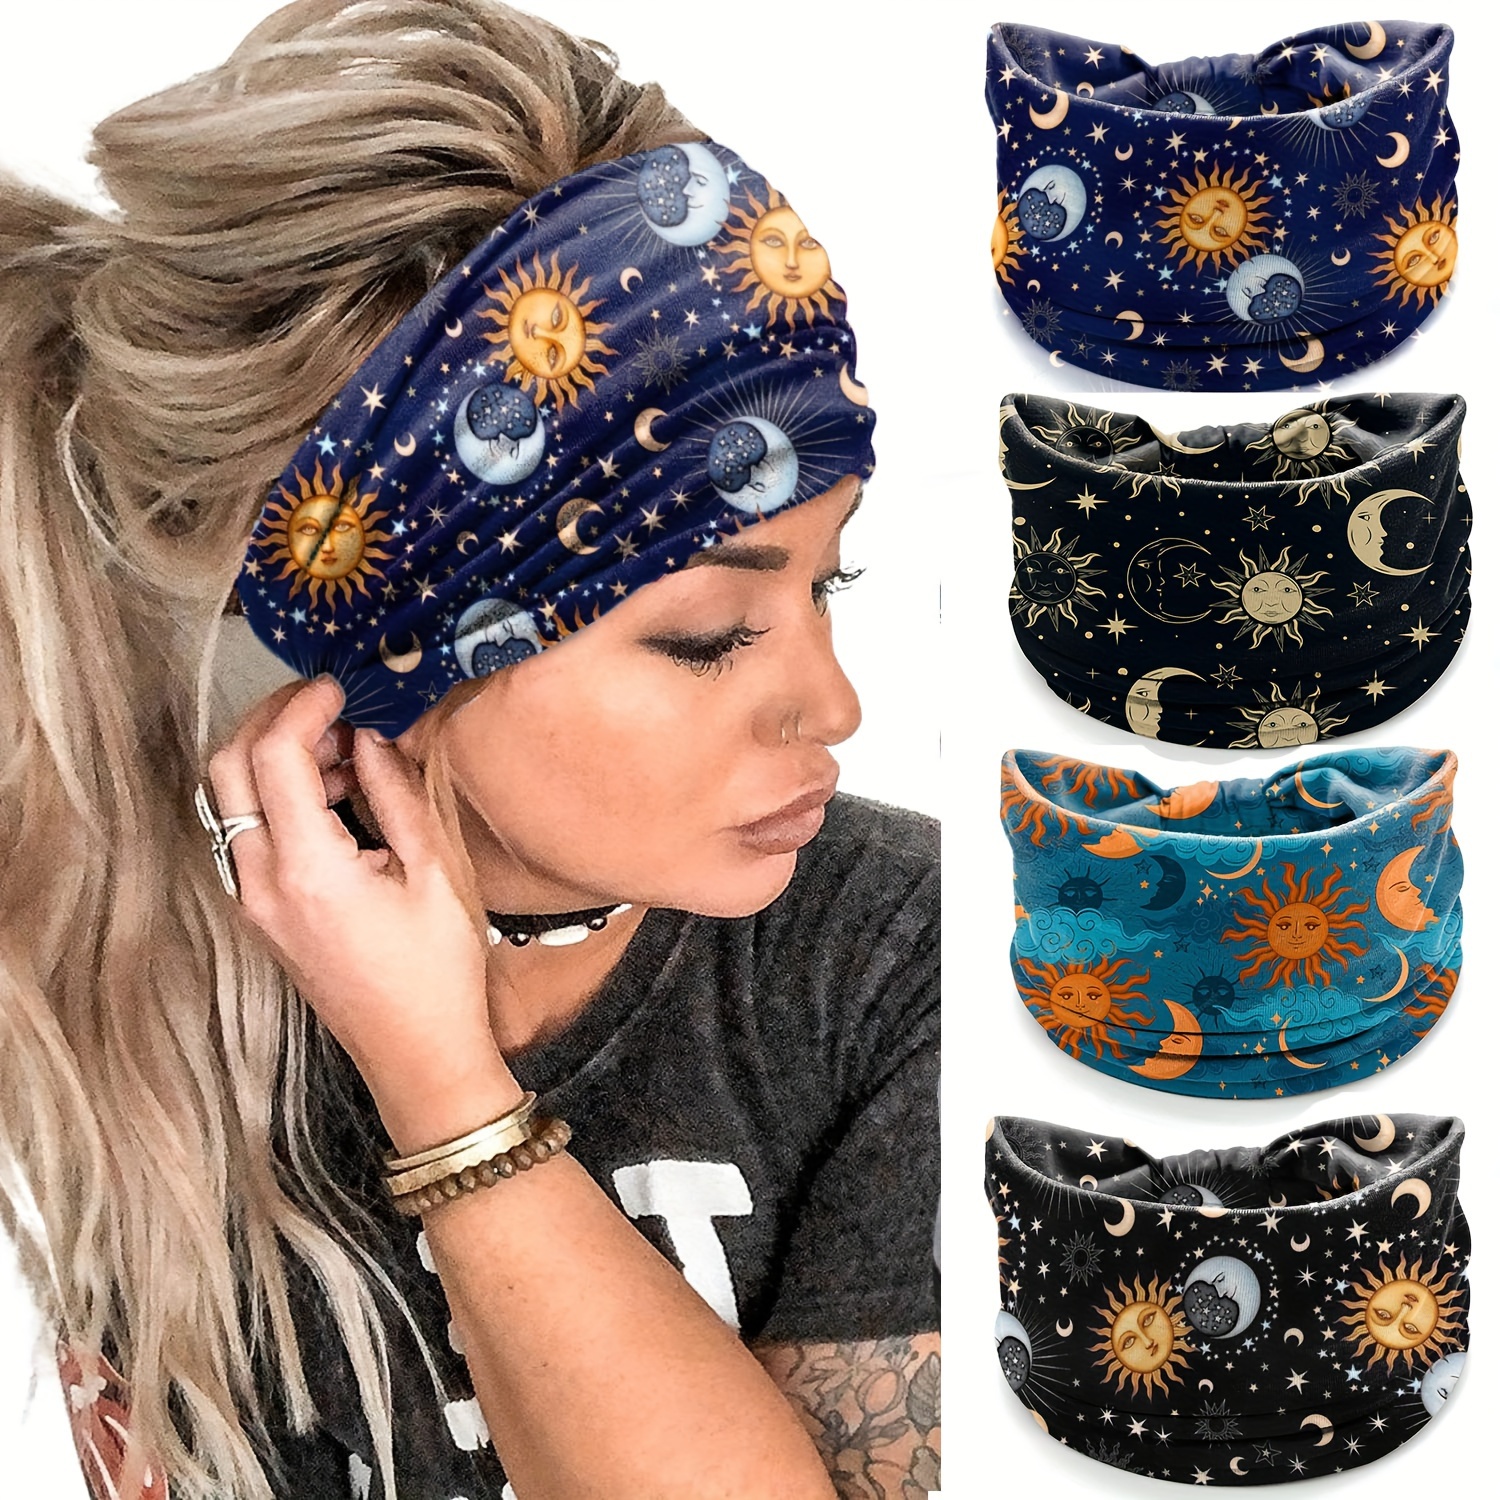 

4pcs/set Moon Sun Pattern Printed Wide Brimmed Head Bands Non Slip Knotted Head Wear Stylish Hair Accessories For Women And Girls